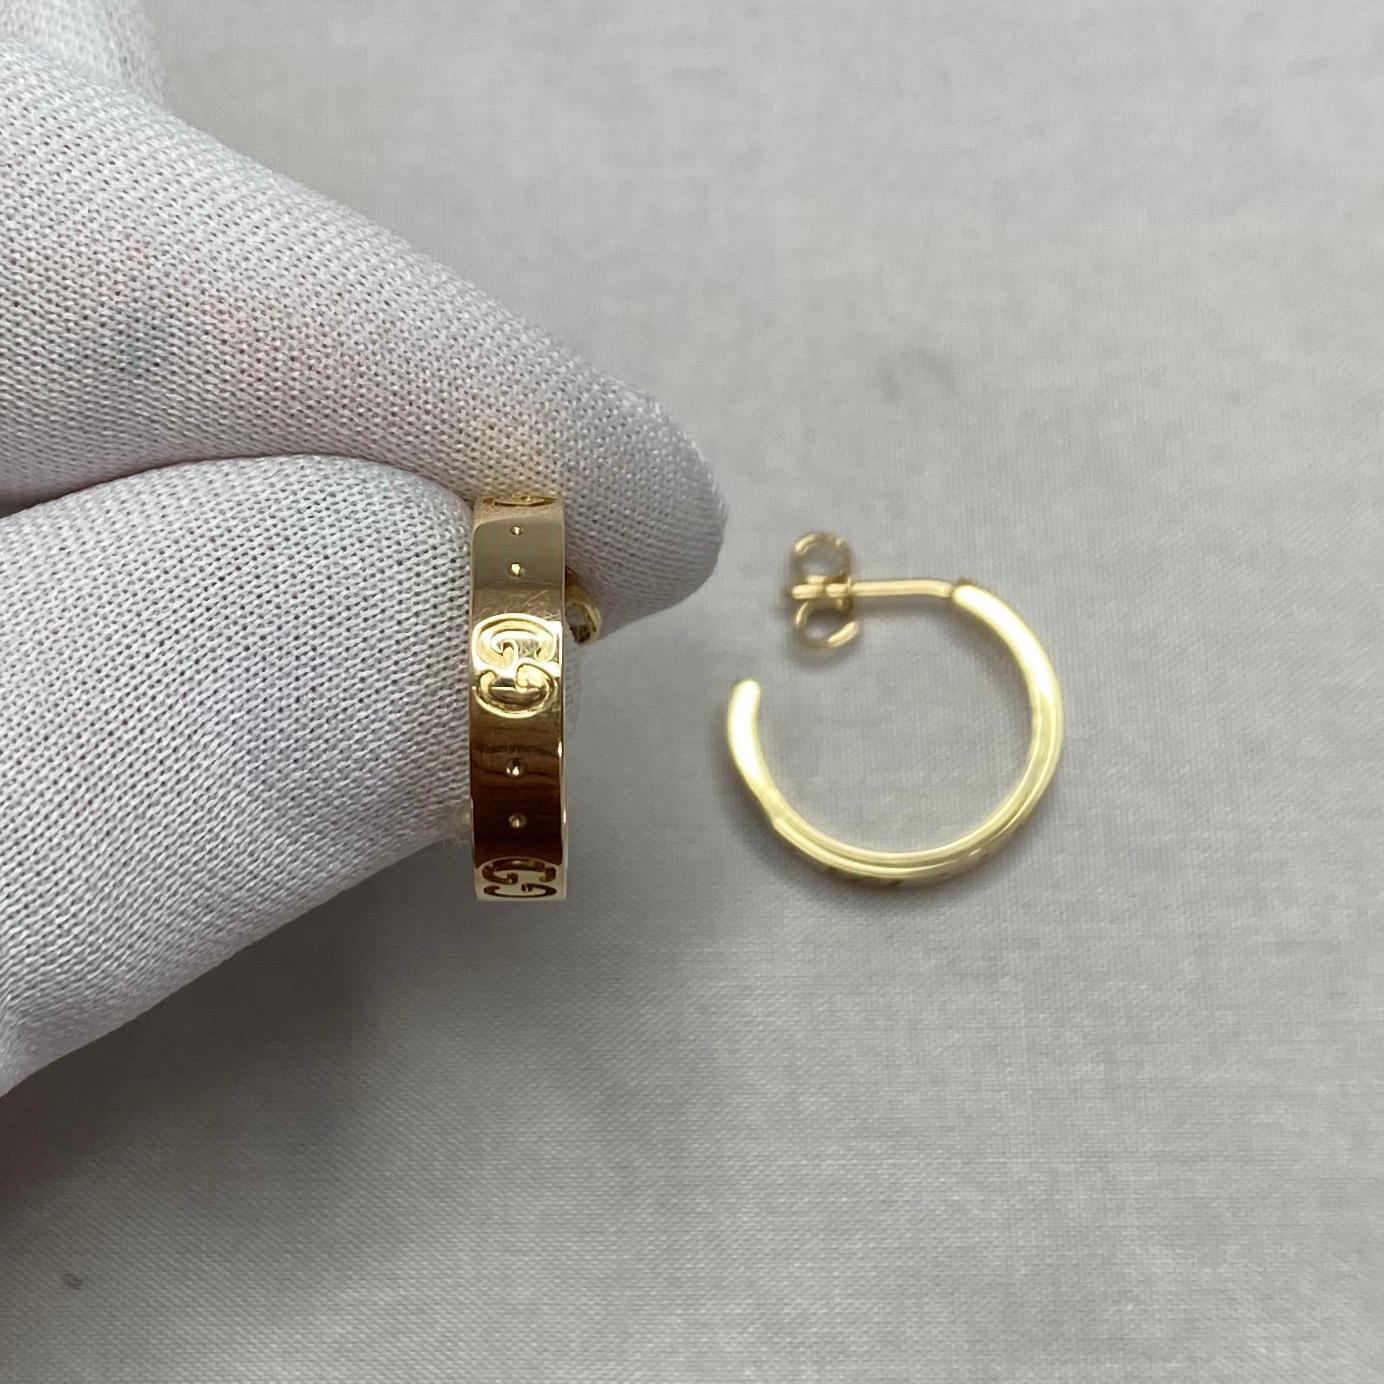 Vintage Gucci 18k Yellow Gold 'GG' Hoop Earrings.

Full hallmarked with Gucci stamps, 750 Gold and 'Made In Italy' hallmark.
Used item, some very minor scratches. Has been professionally cleaned and polished so very bright and shiny. 

Come with